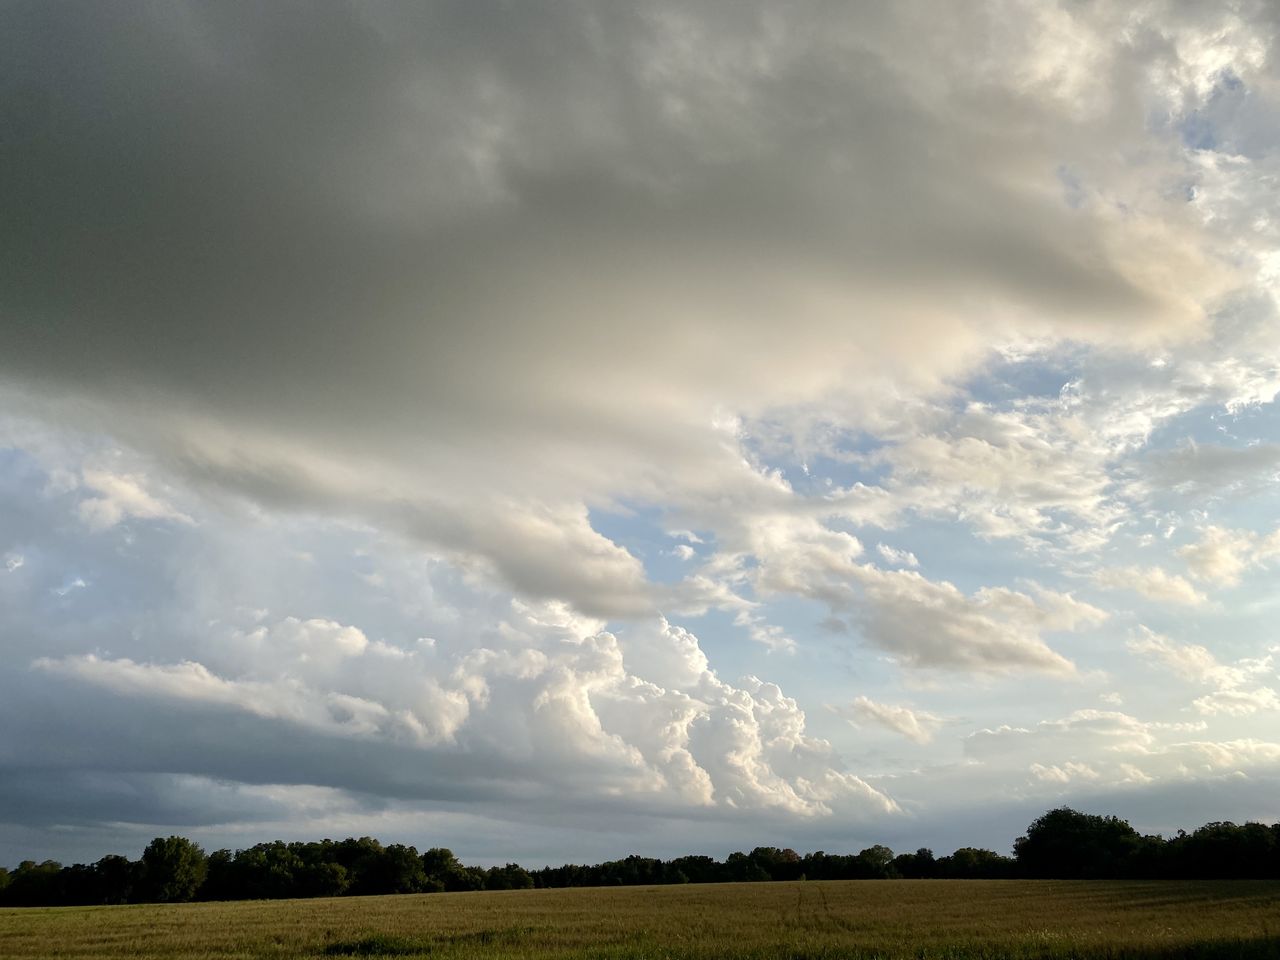 sky, cloud, environment, landscape, nature, horizon, plant, beauty in nature, field, land, scenics - nature, sunlight, storm, cloudscape, no people, dramatic sky, tree, prairie, plain, rural scene, grassland, grass, outdoors, dusk, storm cloud, agriculture, tranquility, day, thunderstorm, horizon over land, overcast, morning, tranquil scene